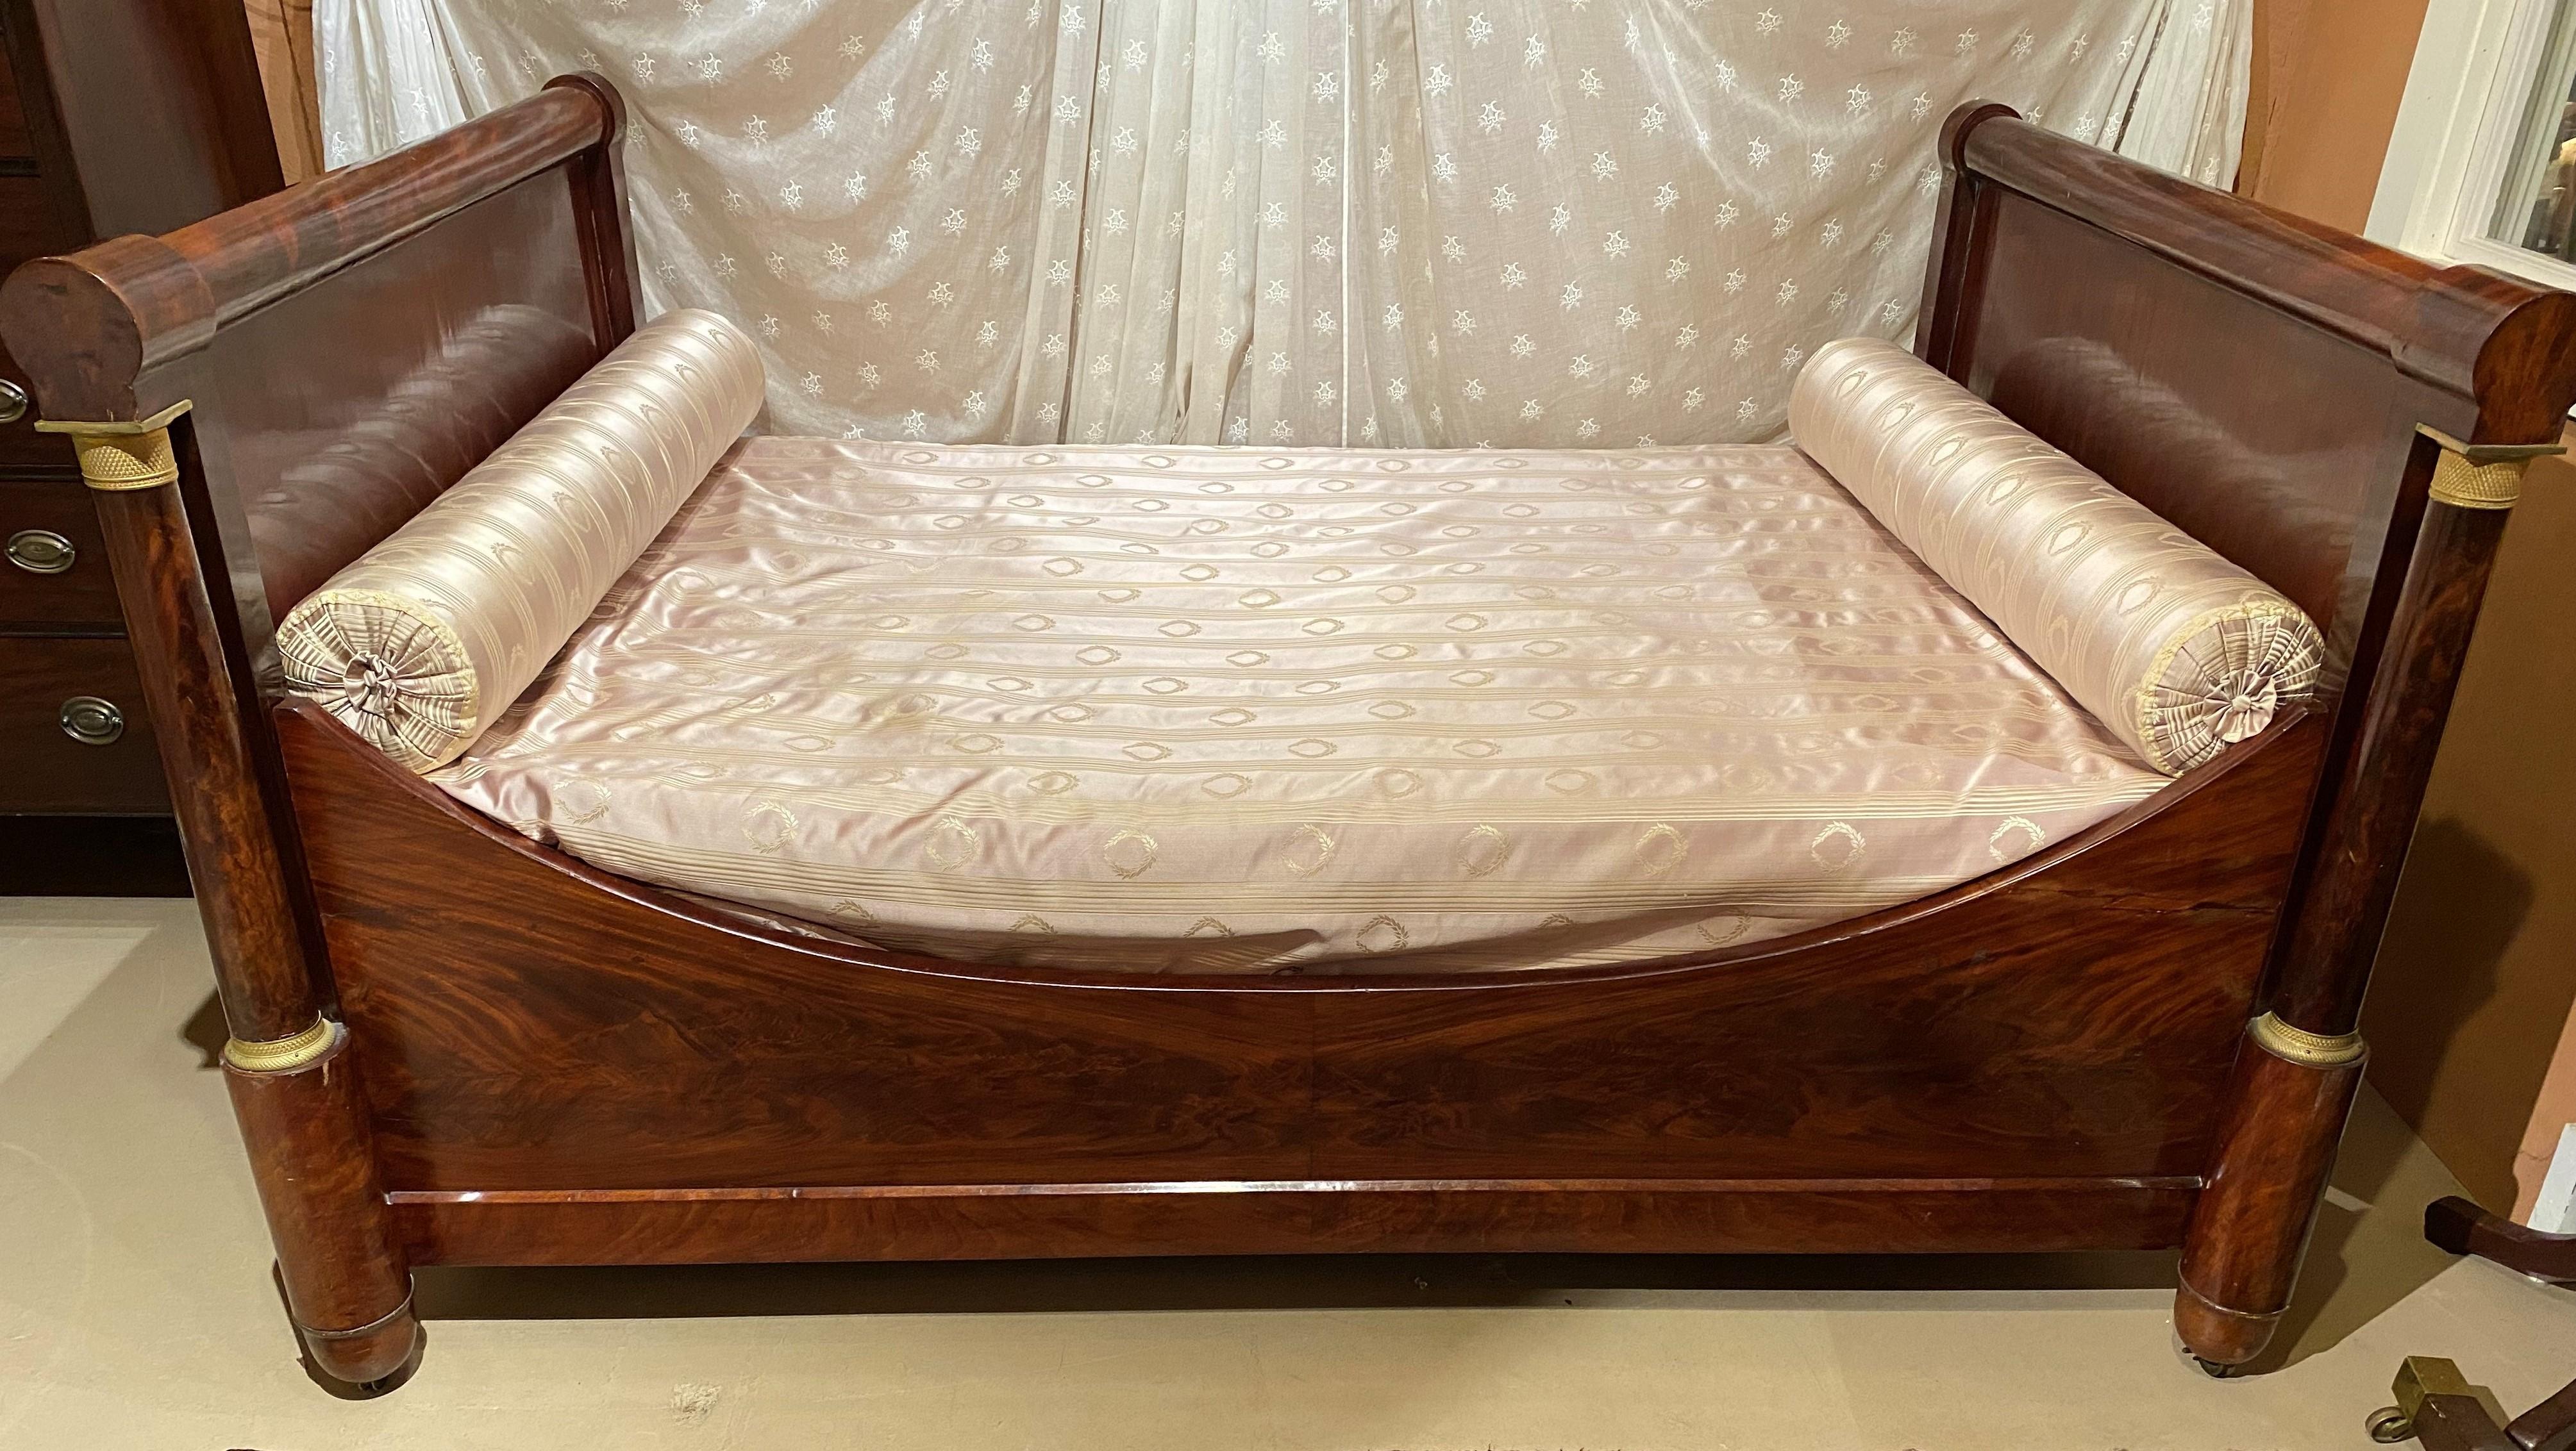 A fine Empire mahogany bed, also referred to as an alcove bed or daybed, with full corner front columns with ormolu capitals, metal casters, and nicely appointed with a sheer white canopy embroidered with lyre decoration and accented with clear edge